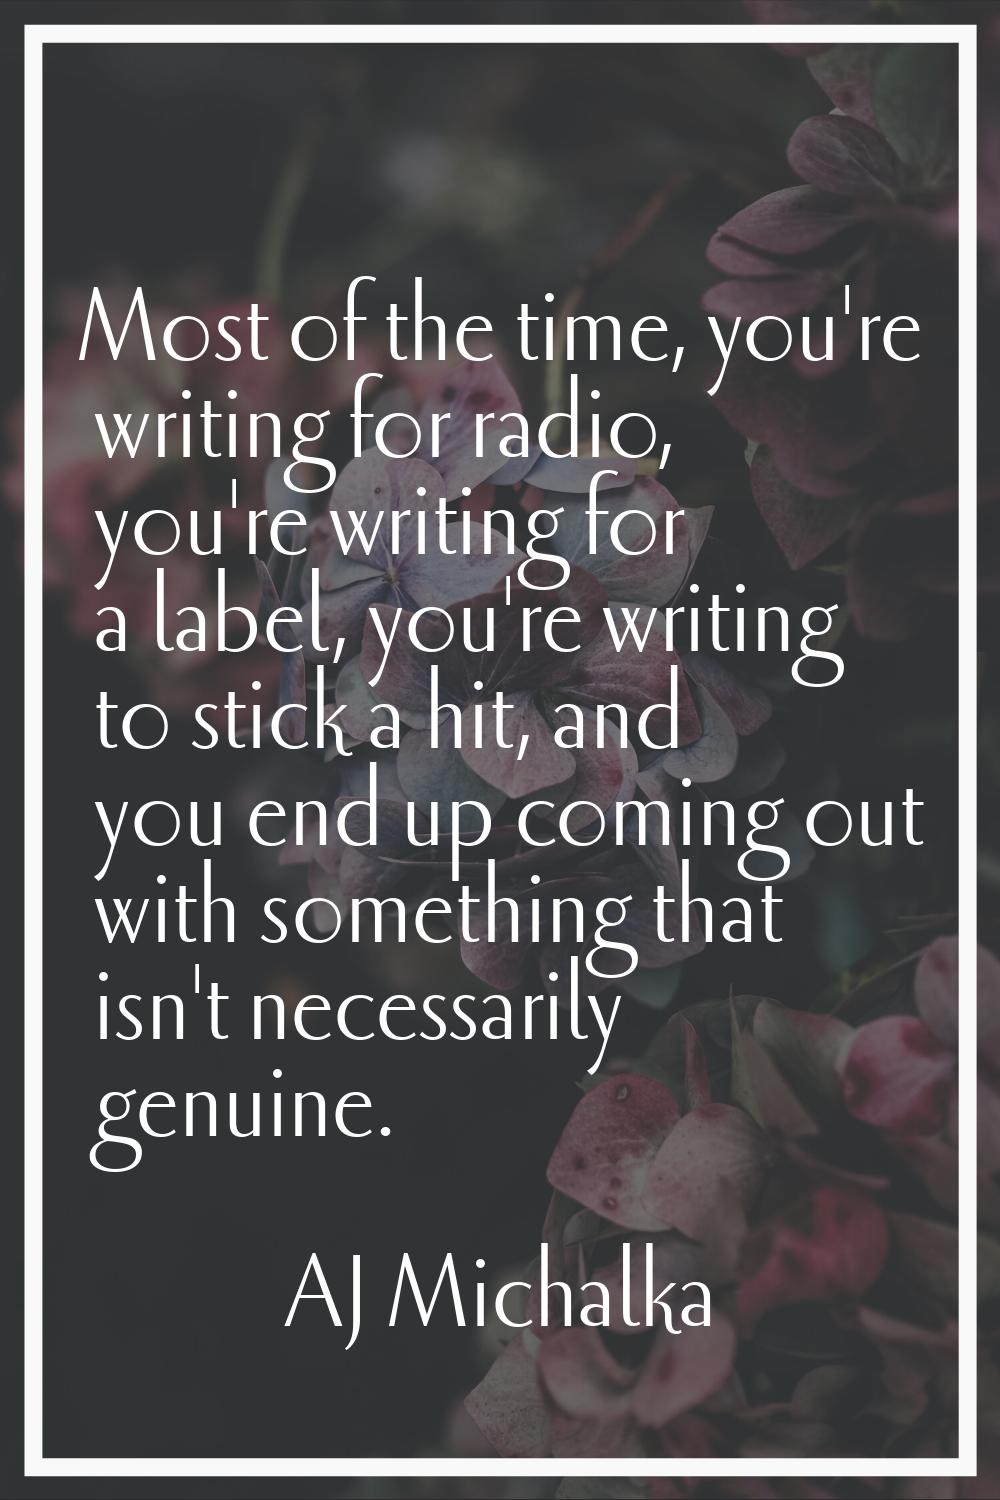 Most of the time, you're writing for radio, you're writing for a label, you're writing to stick a h